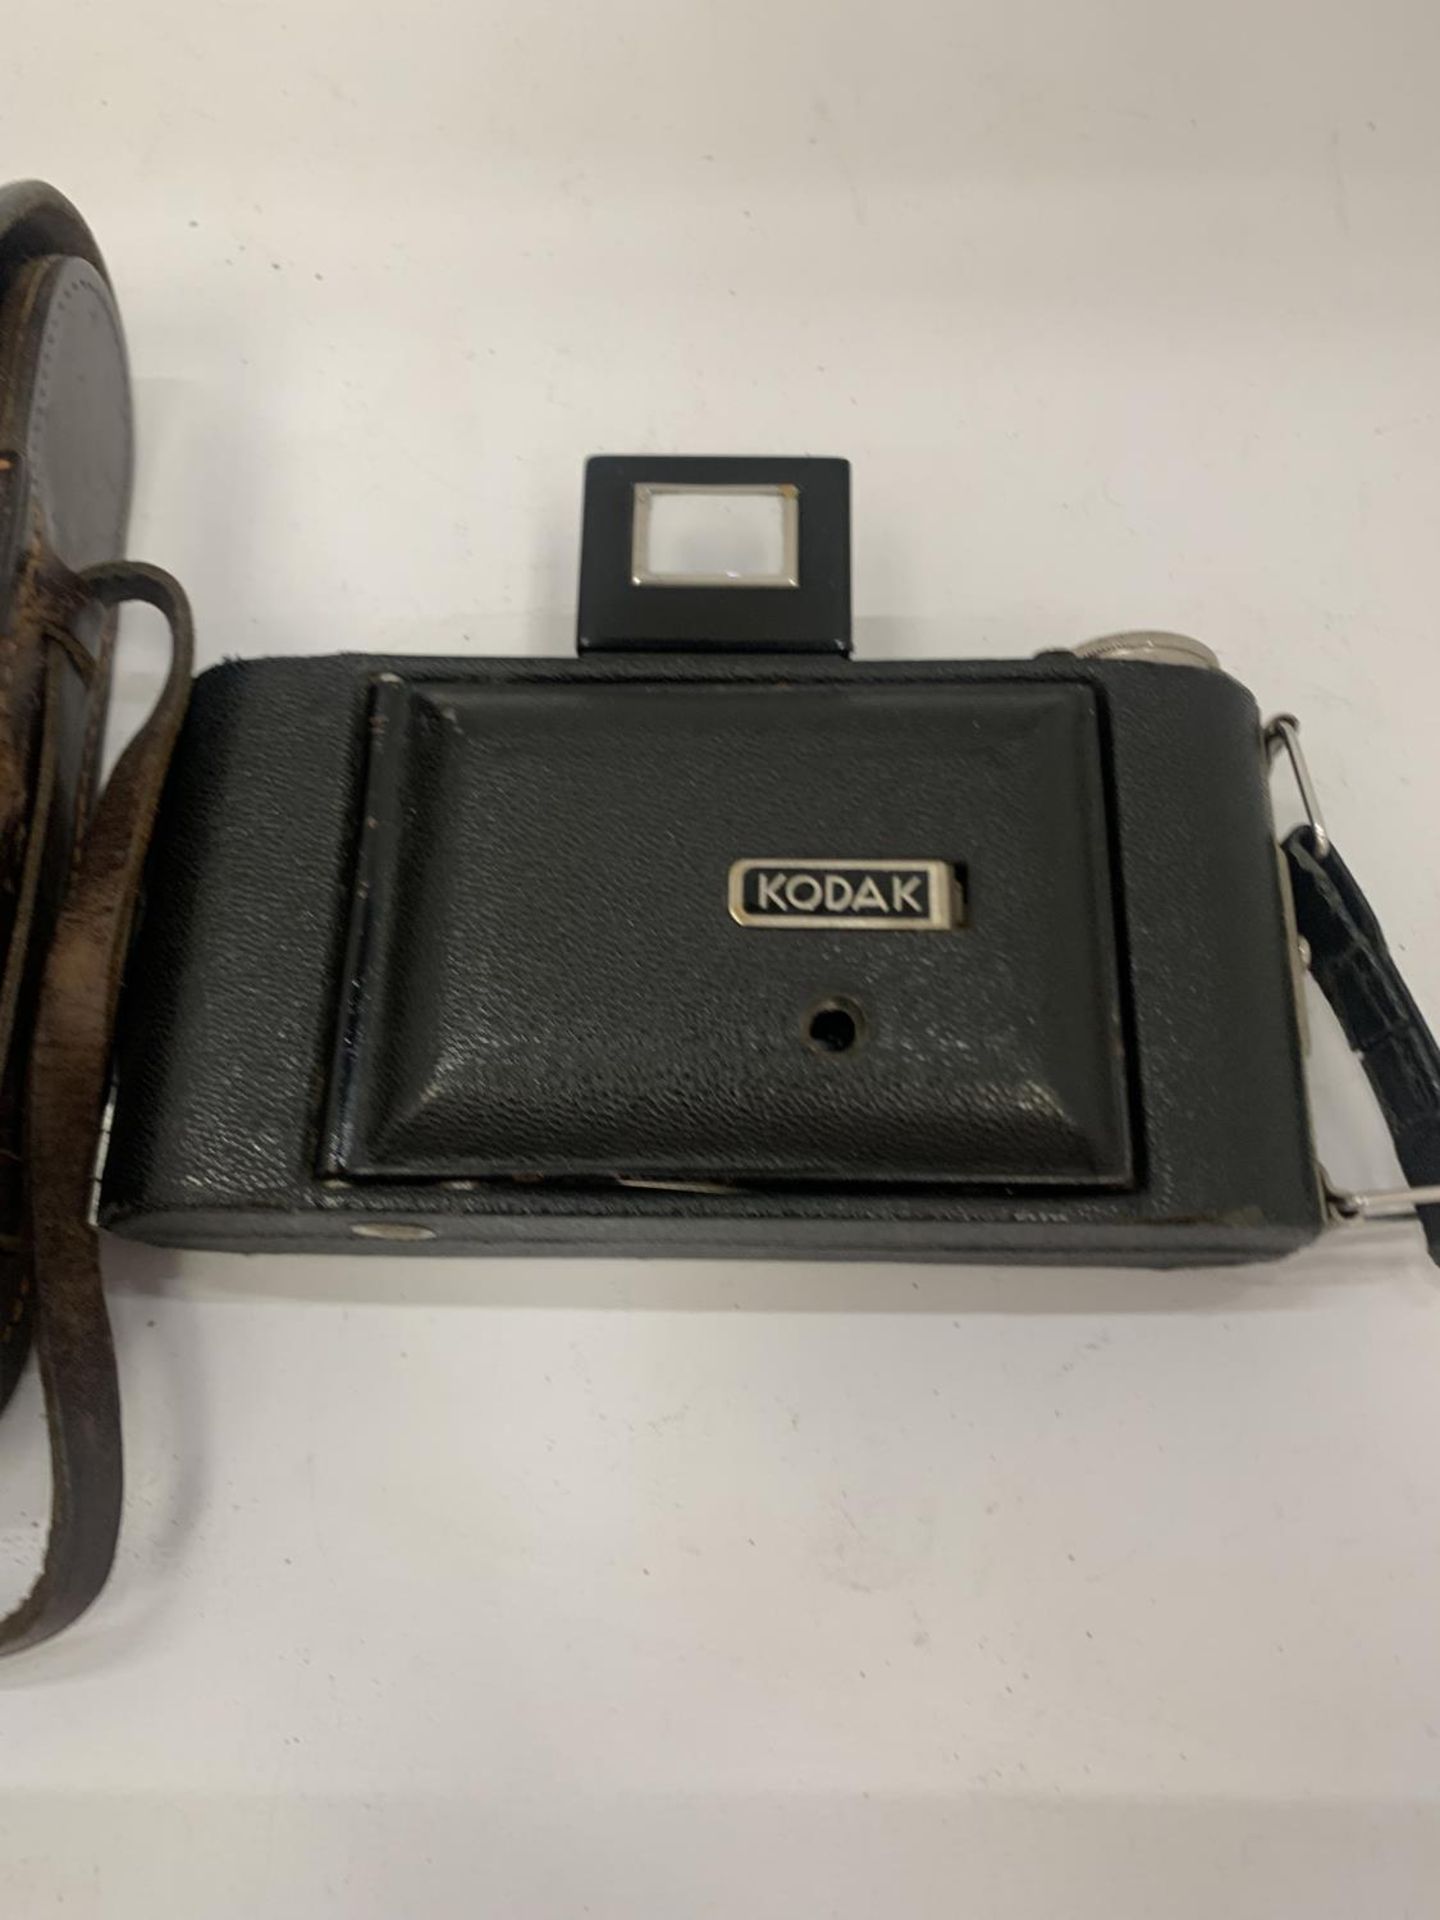 A VINTAGE KODAK CAMERA AND LEATHER CASE - Image 3 of 4